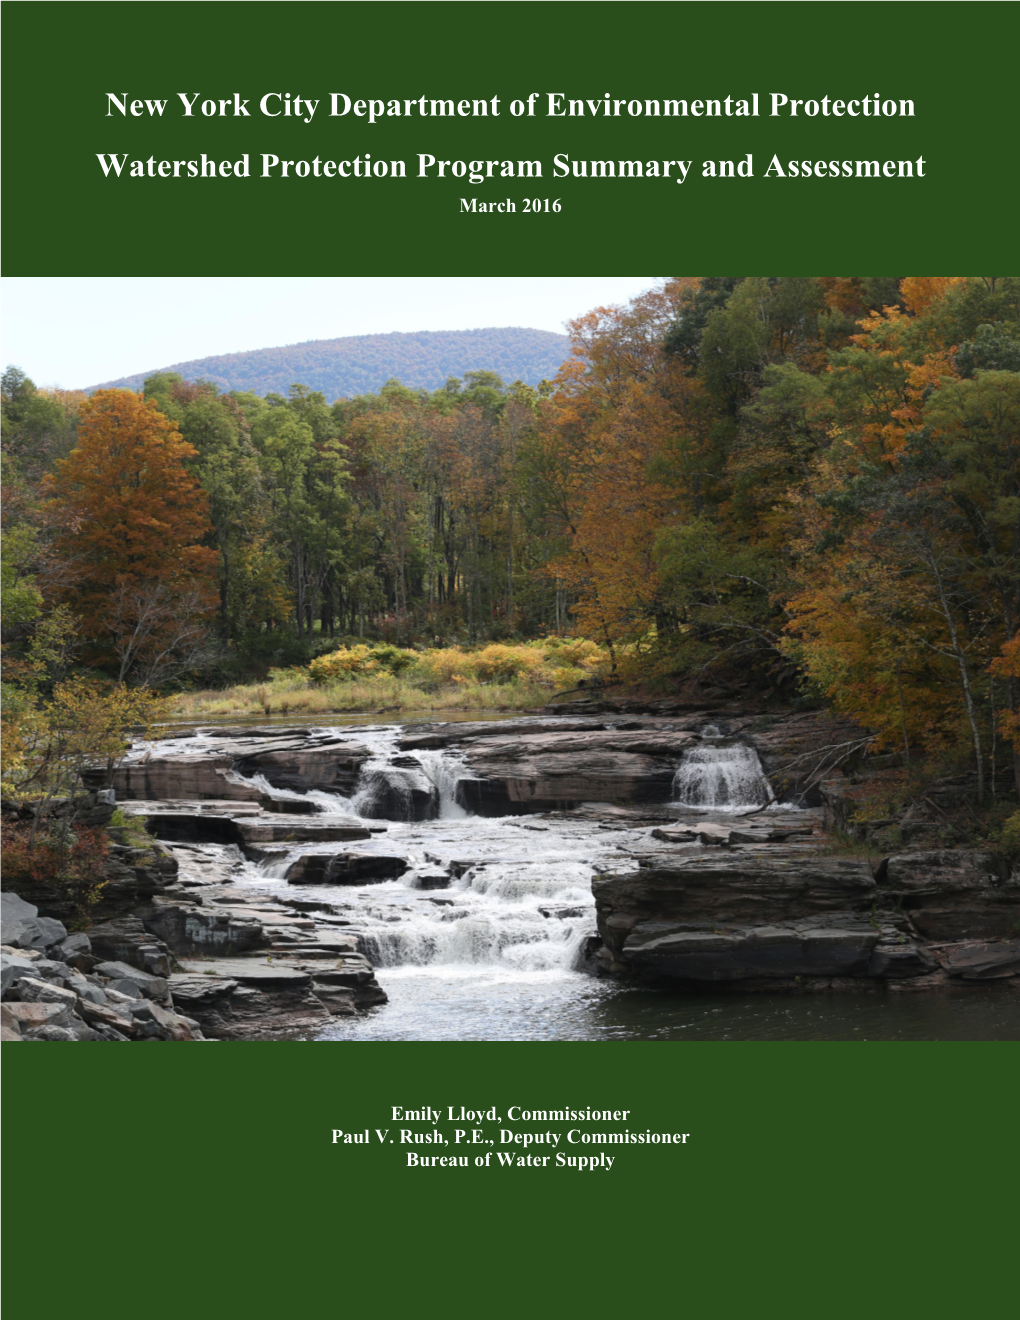 2016 Watershed Protection Program Summary and Assessment